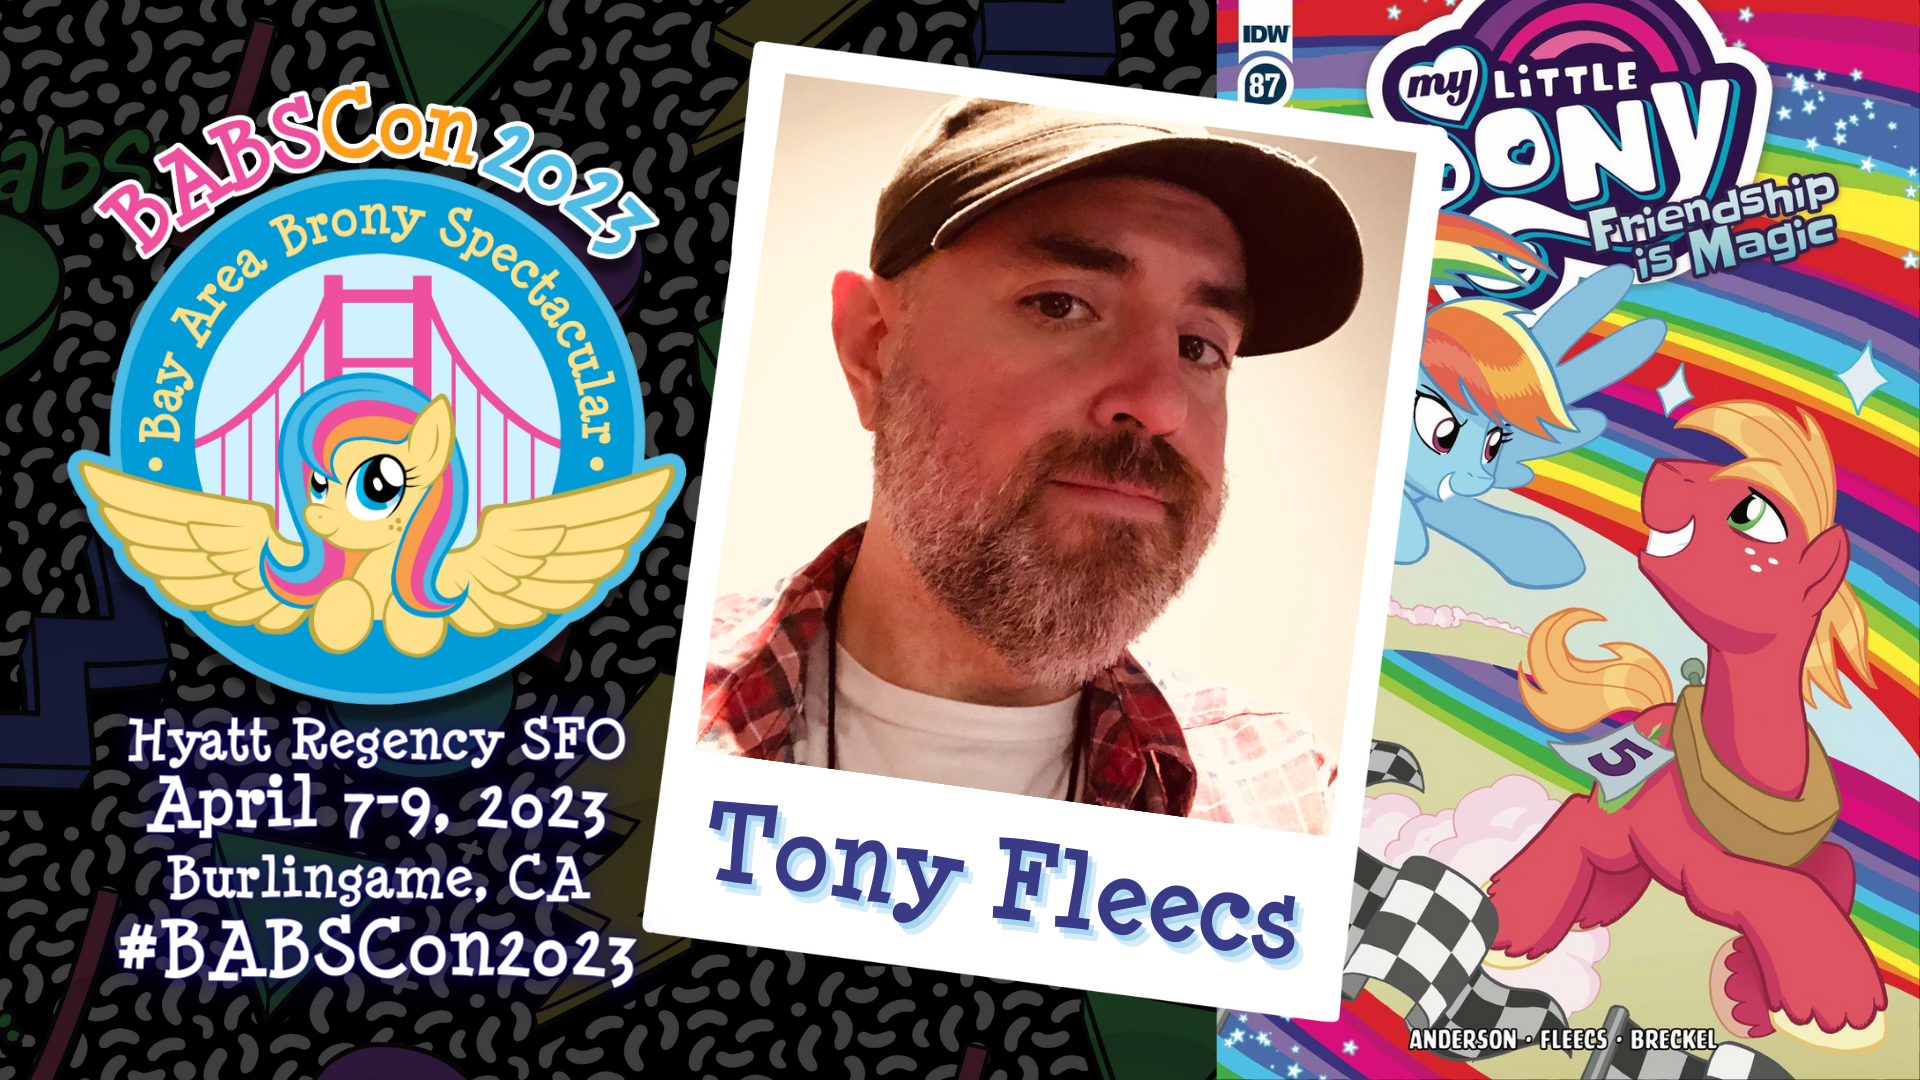 BABSCon 2023 Goes to the Dogs with Tony Fleecs!